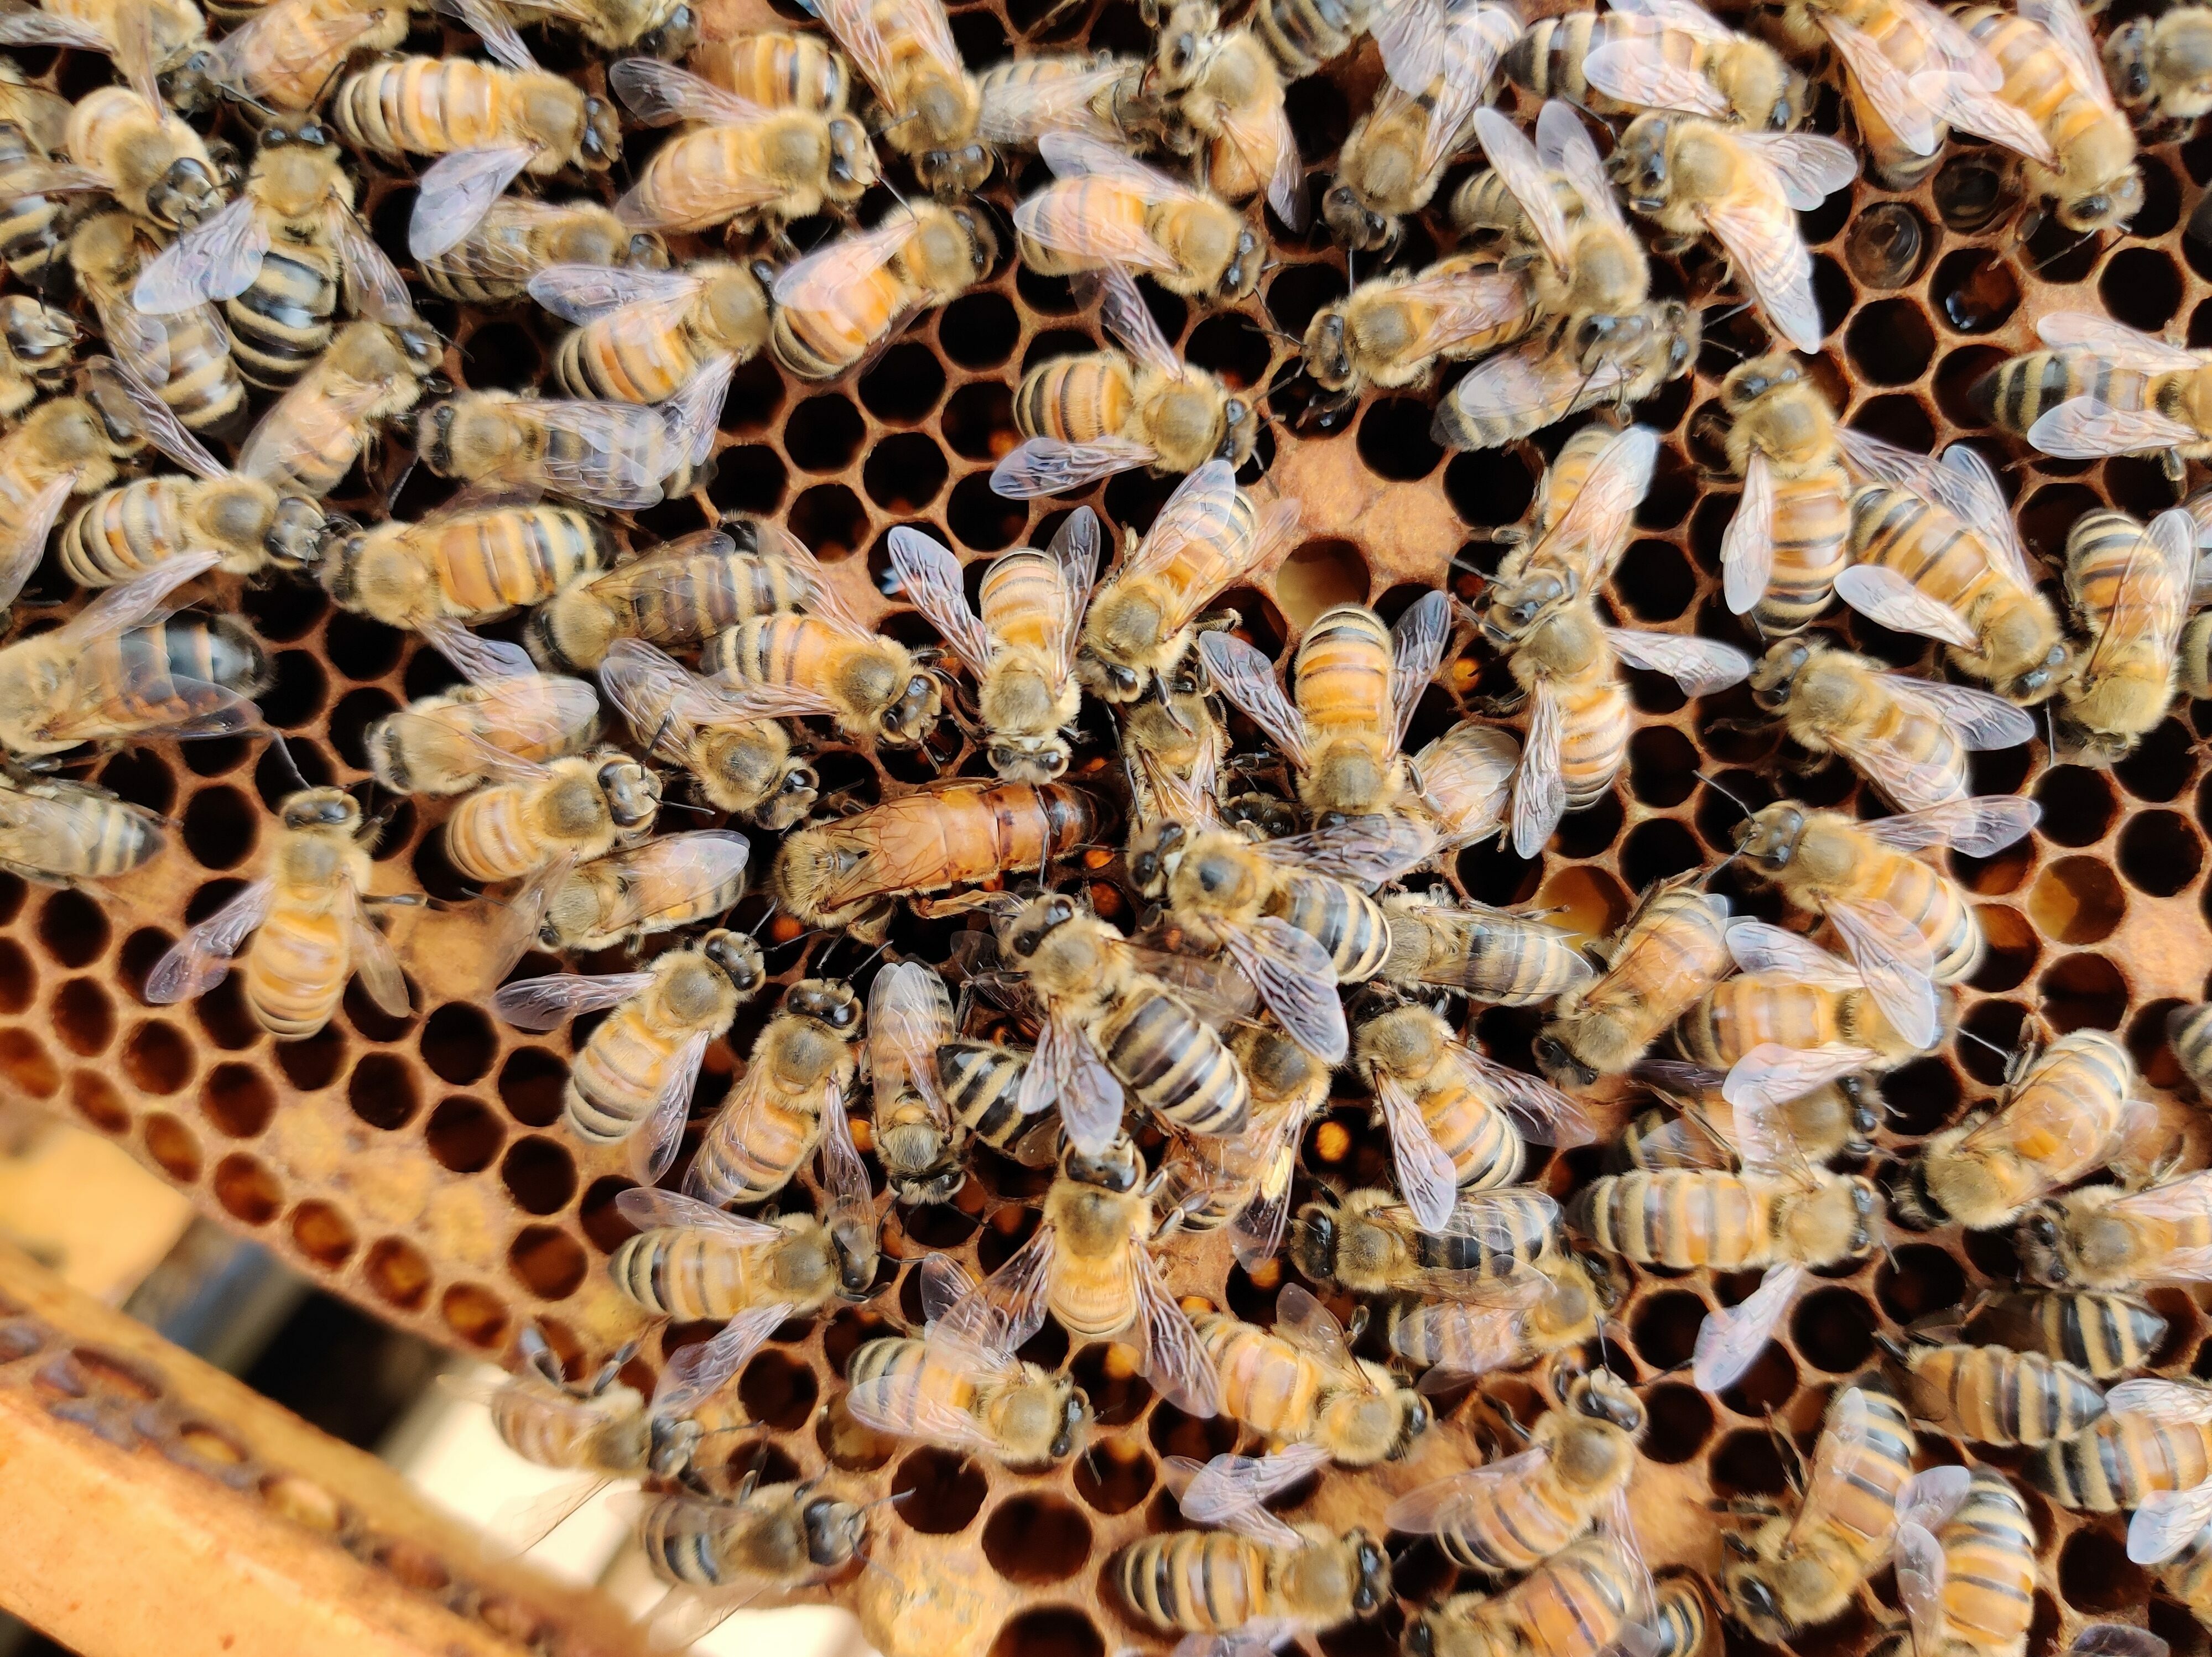 Queen spotted in the center of the image during my first hive inspection.